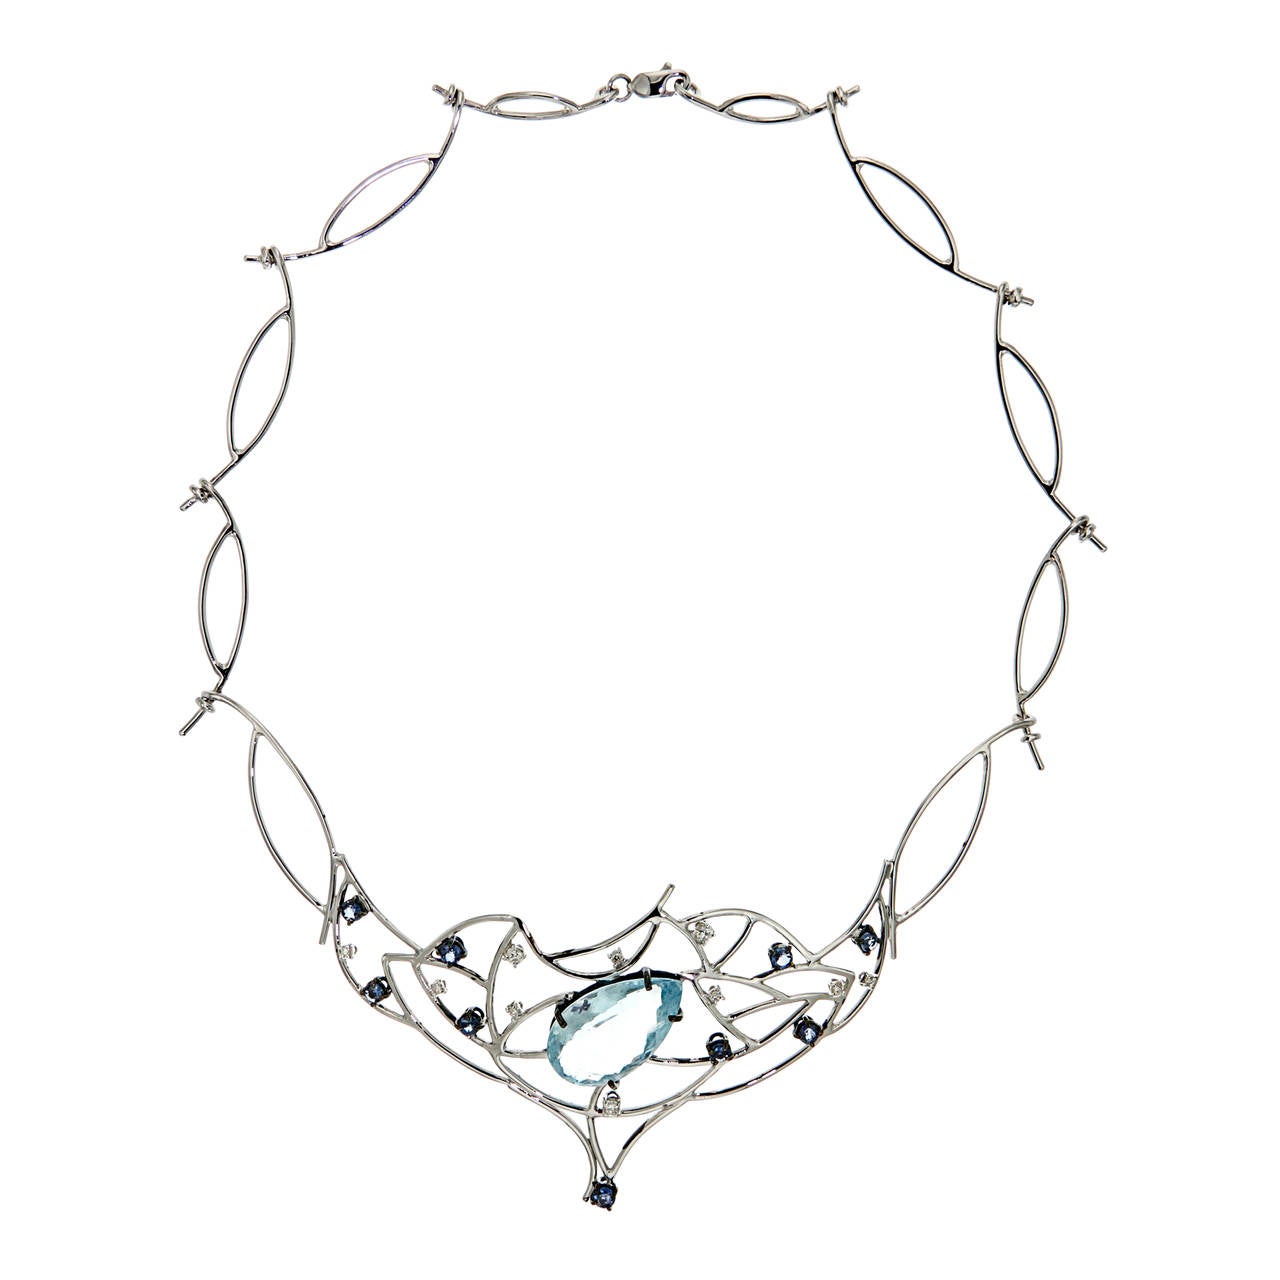 Wonderful 18k white gold necklace with natural aquamarine 18.10 ctw, sapphires 1.60 ctw and diamonds 0.40 ctw.
This necklace is handcrafted in Italy by Botta Gioielli and it  is stamped with the Italian Mark 750 - 716MI.
Ready for delivery. It can